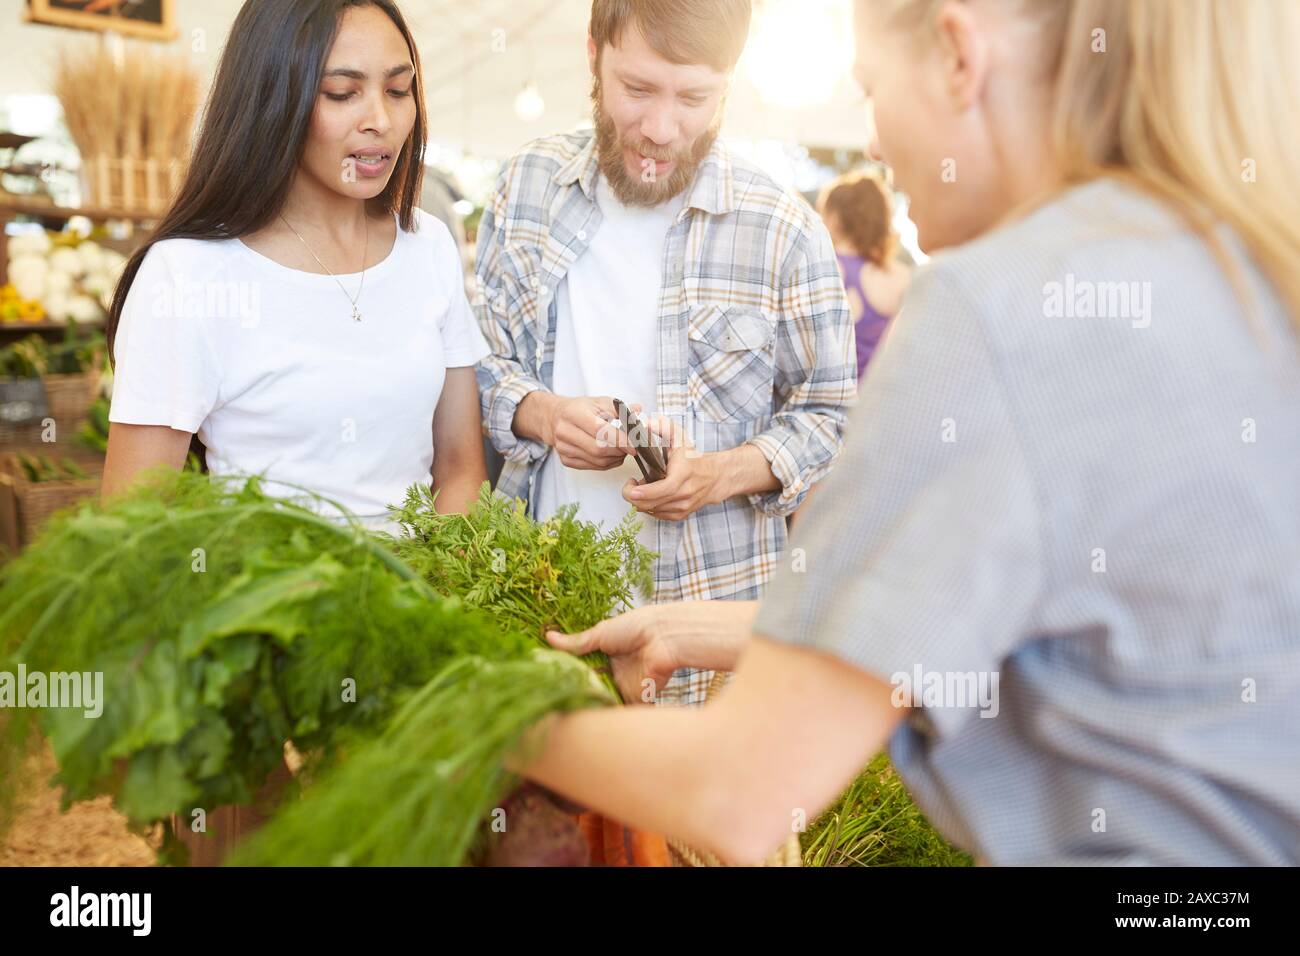 Couple buying vegetables at farmer’s market Stock Photo